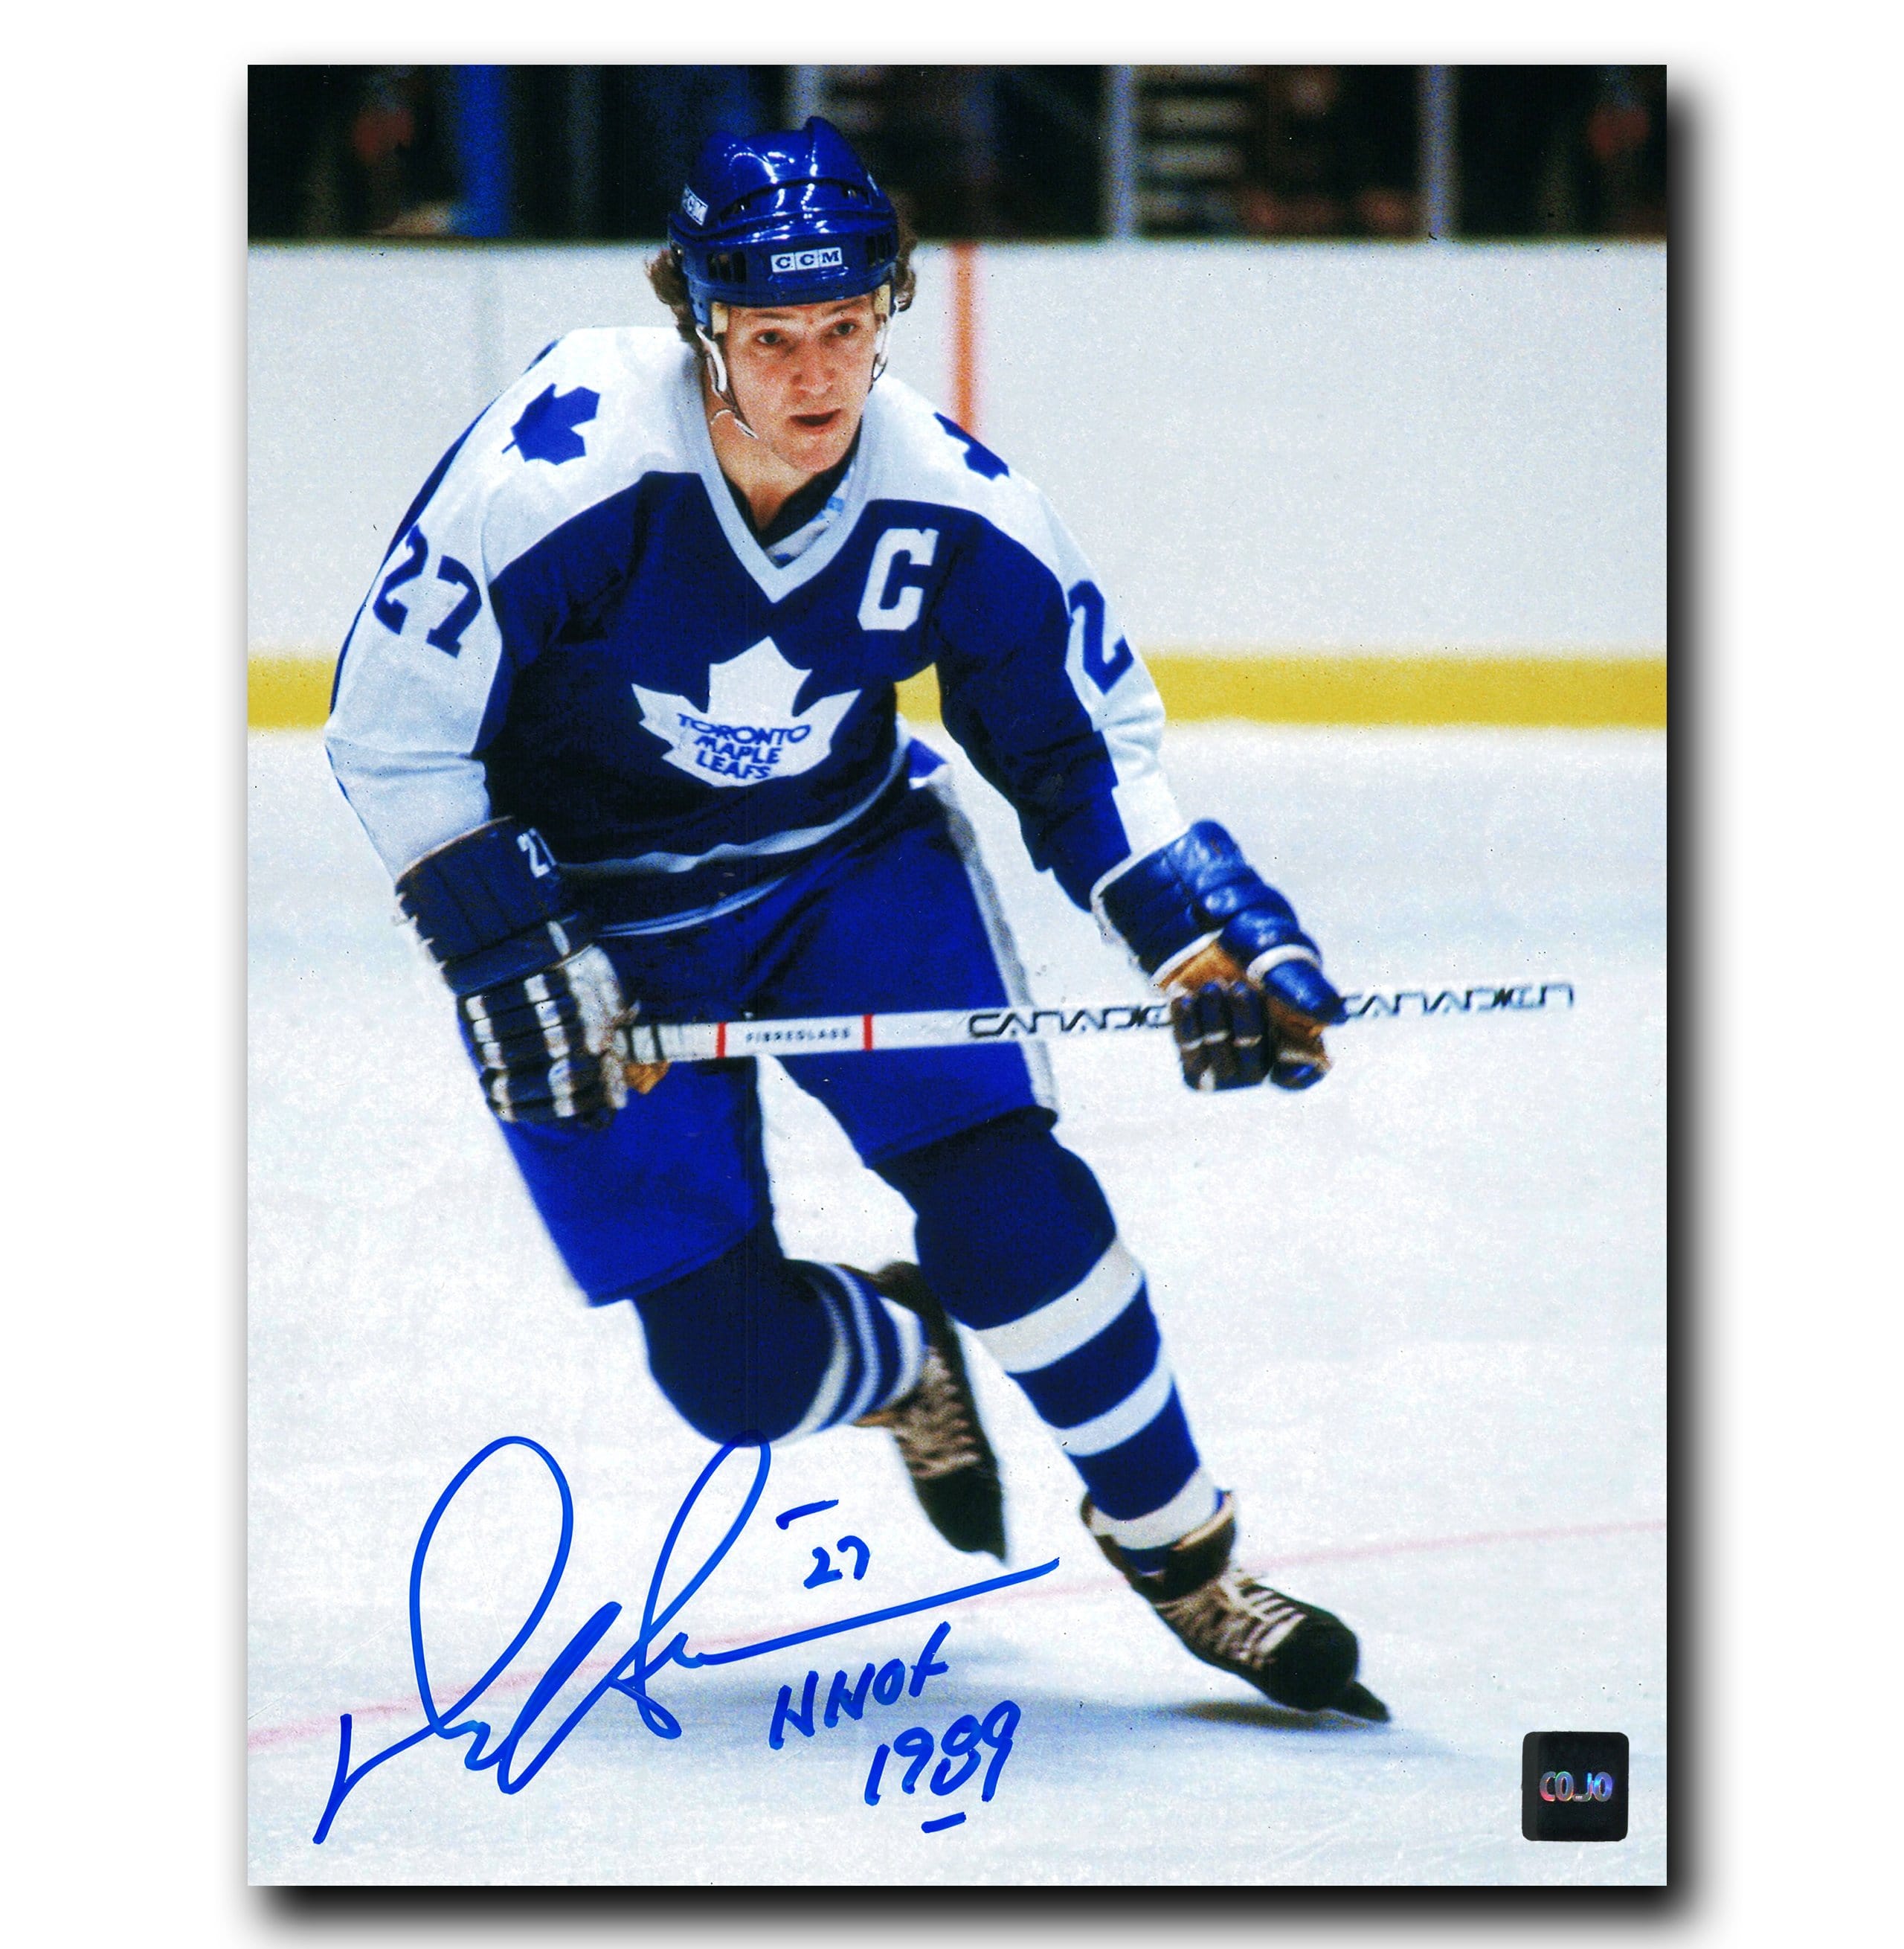 Tiger Williams Toronto Maple Leafs Autographed Hockey Action 8x10 Photo 